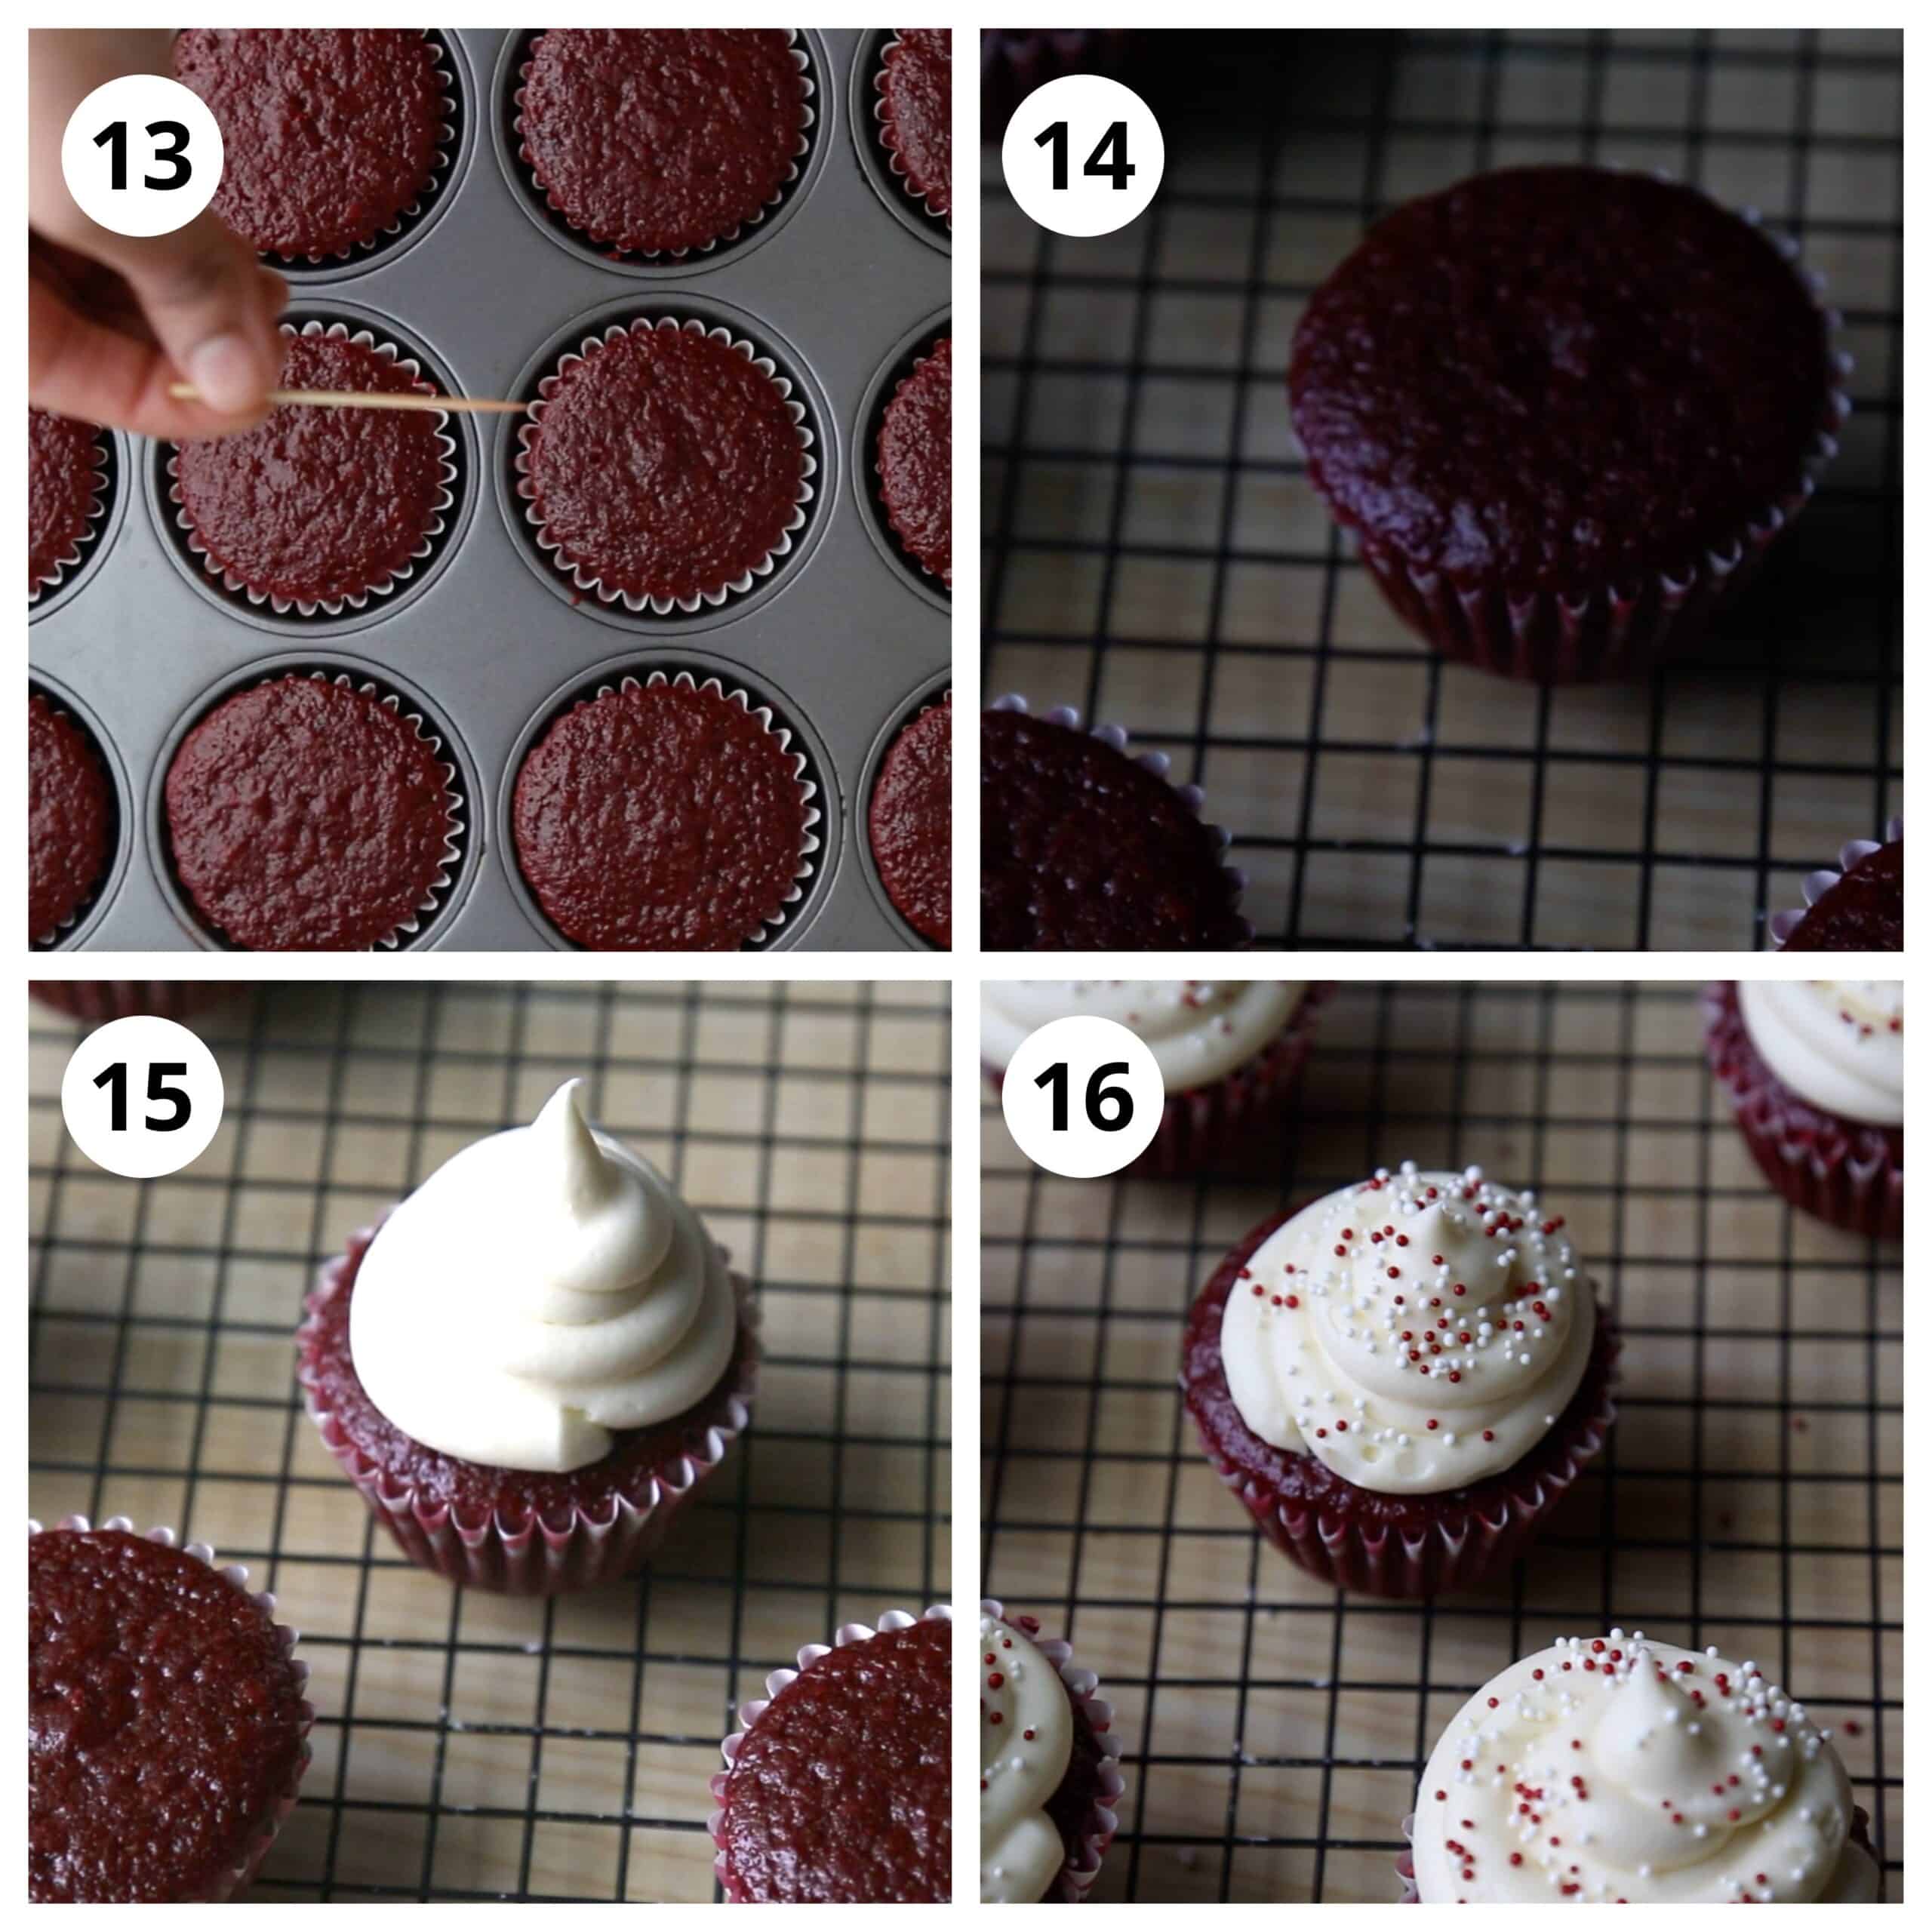 Steps for cooling and frosting the cupcakes. 